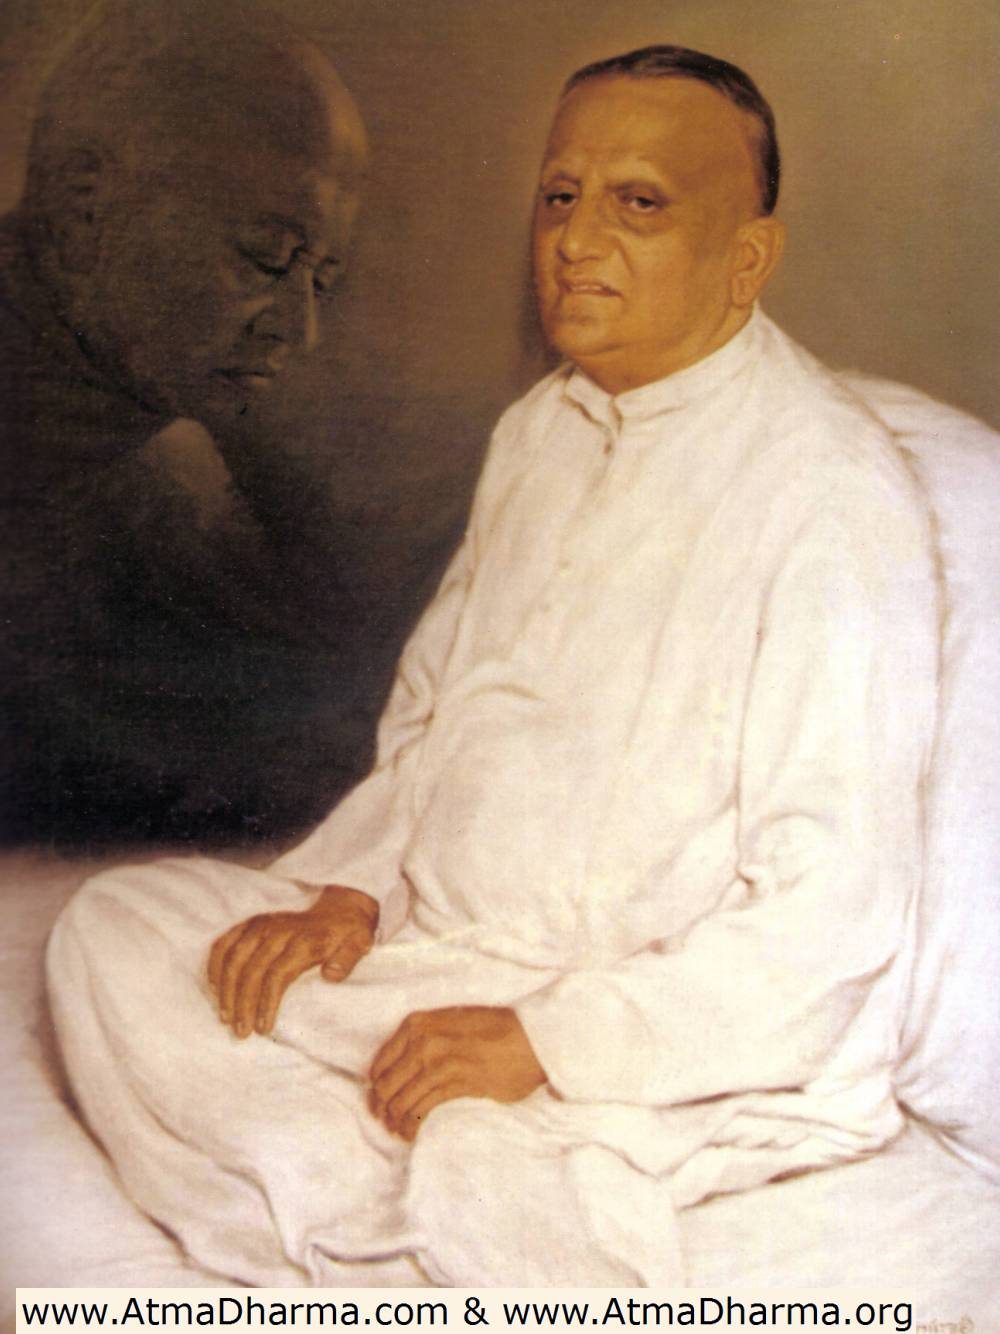 Pujya Nihalchandra Sogani was a student of Gurudev Shree Kanji Swami. He obtained samyakt darshan (self-realisation) after hearing just one lecture by Gurudev Kanji Swami. The words in Gurudev's lecture that enabled Pujya Soganiji to understand the difference between soul and non-soul were 'knowledge and raag (externally focused states) are separate'